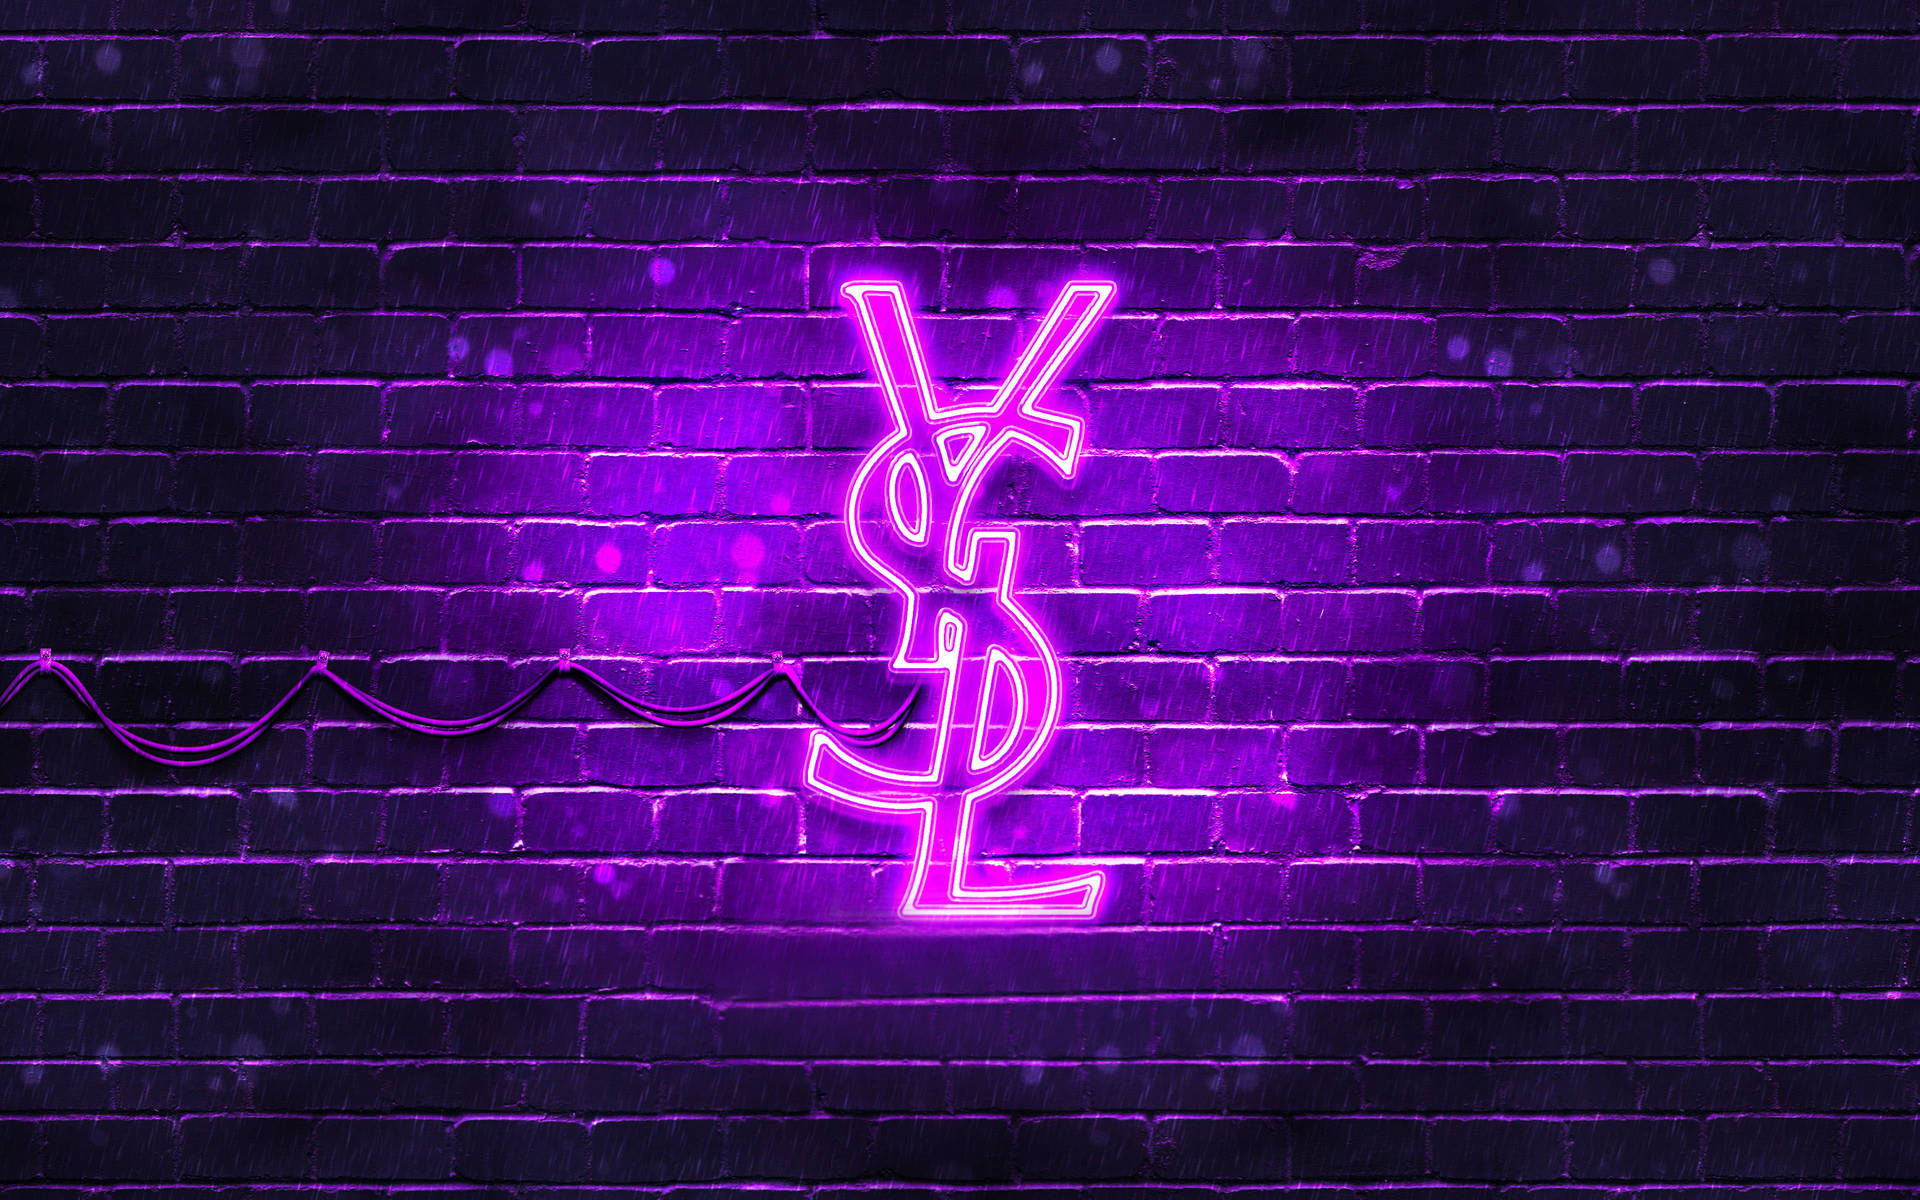 Top 999+ Ysl Wallpaper Full HD, 4K Free to Use